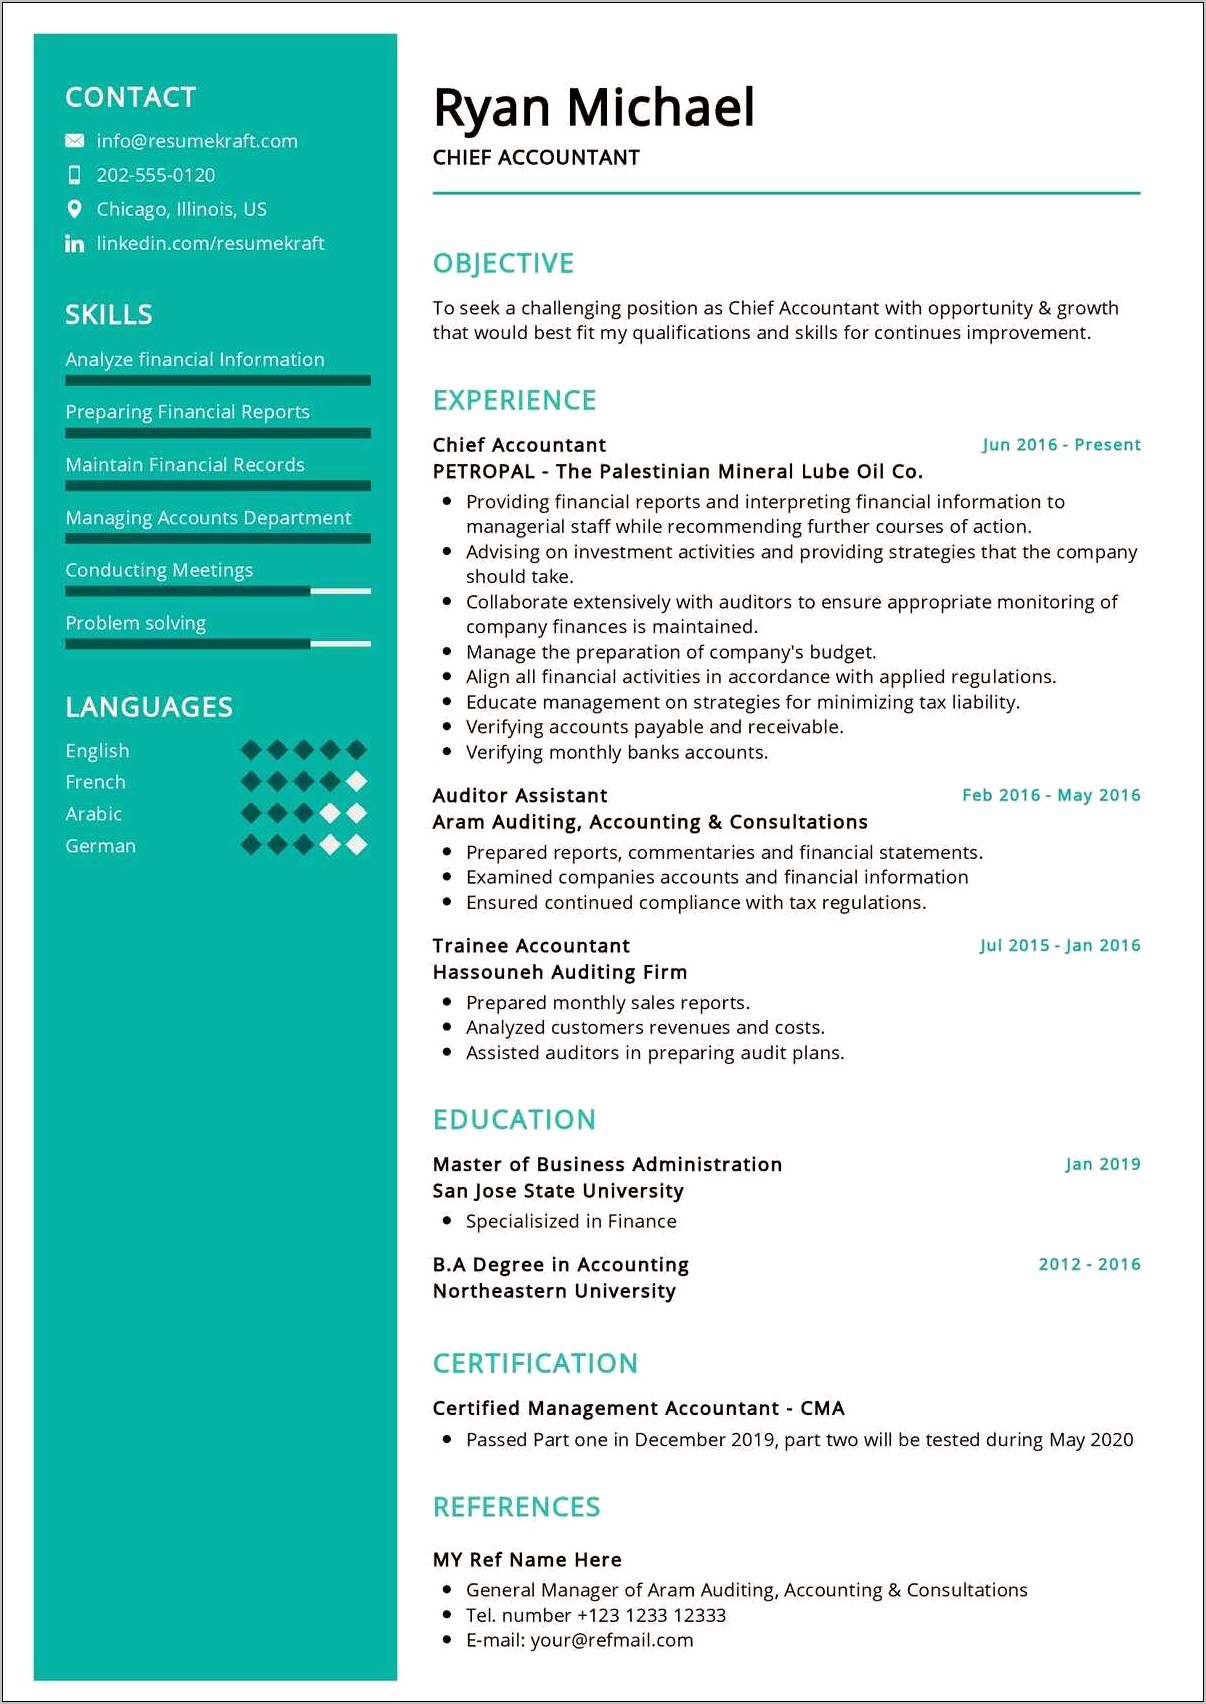 Examples Of Post Articles Trainee Accountant Resume